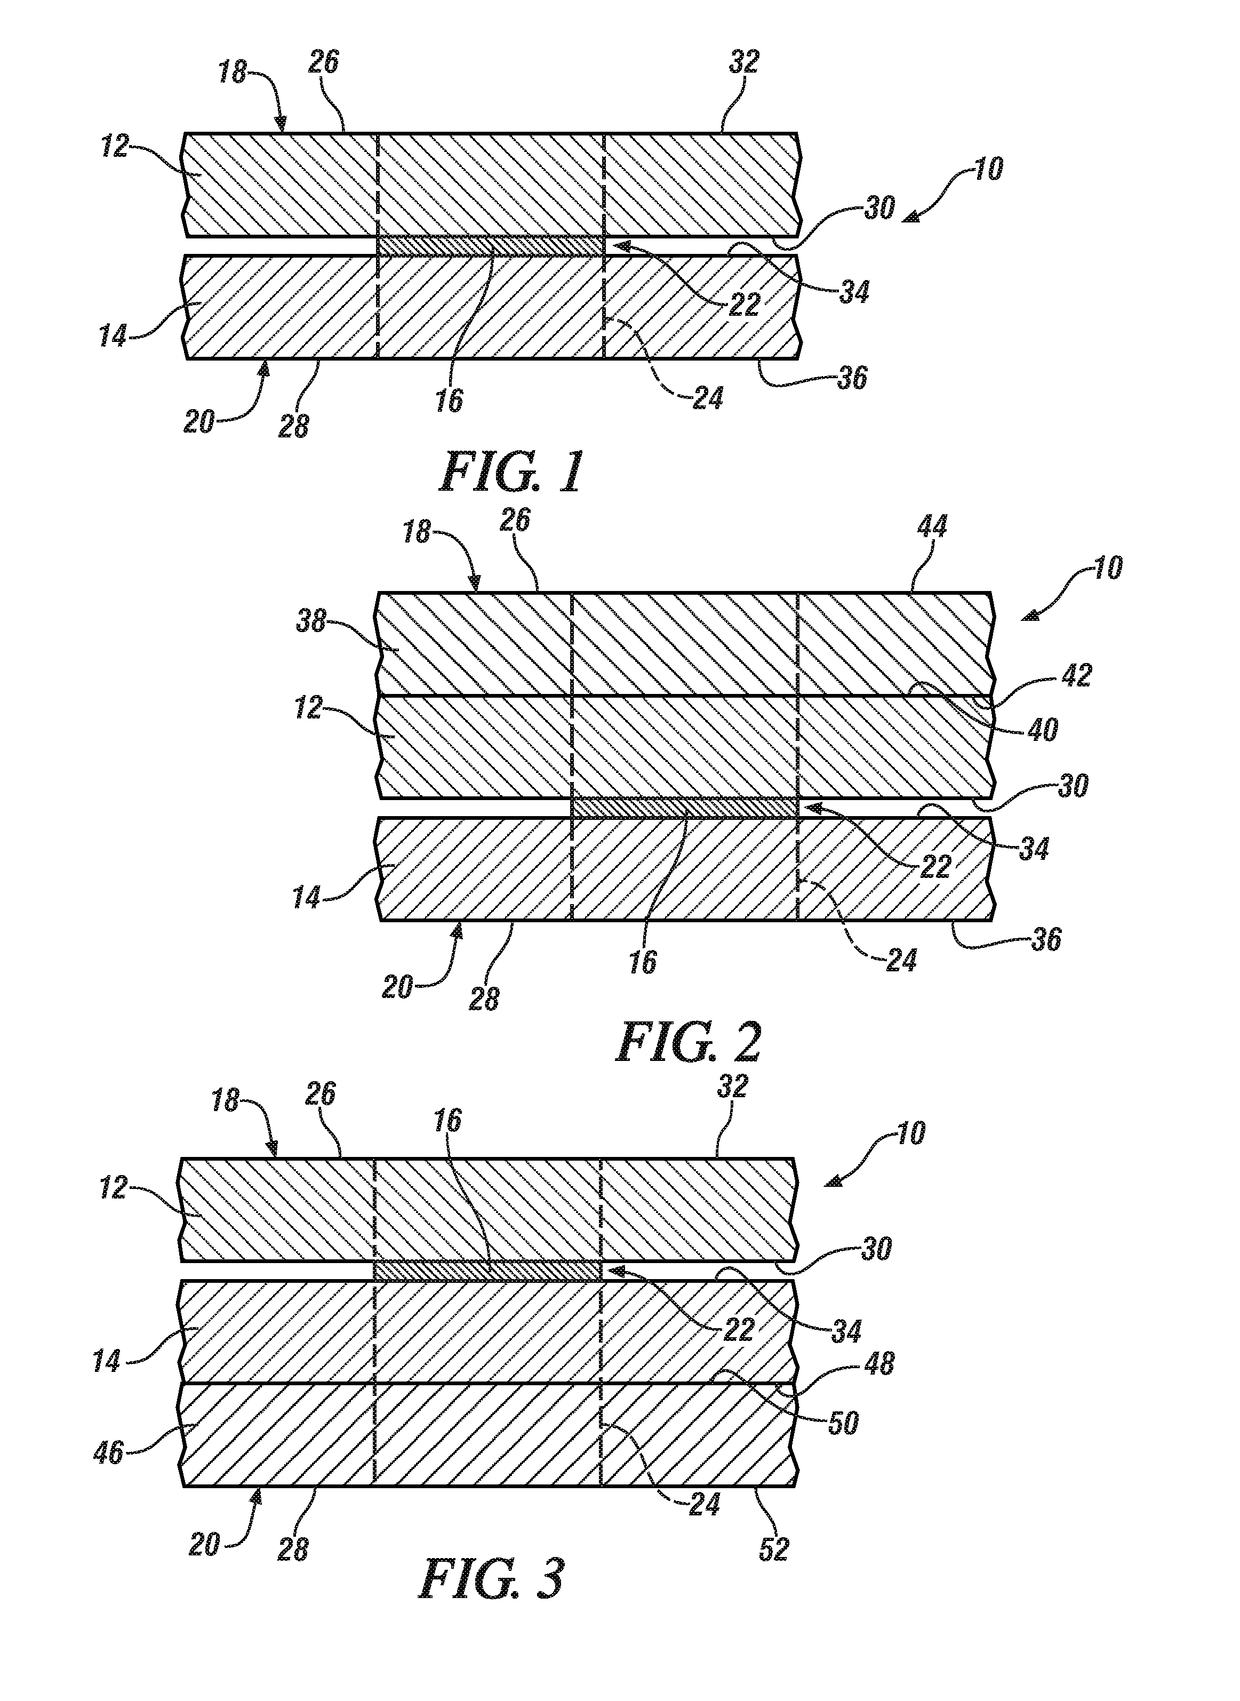 Method of joining aluminum and steel workpieces